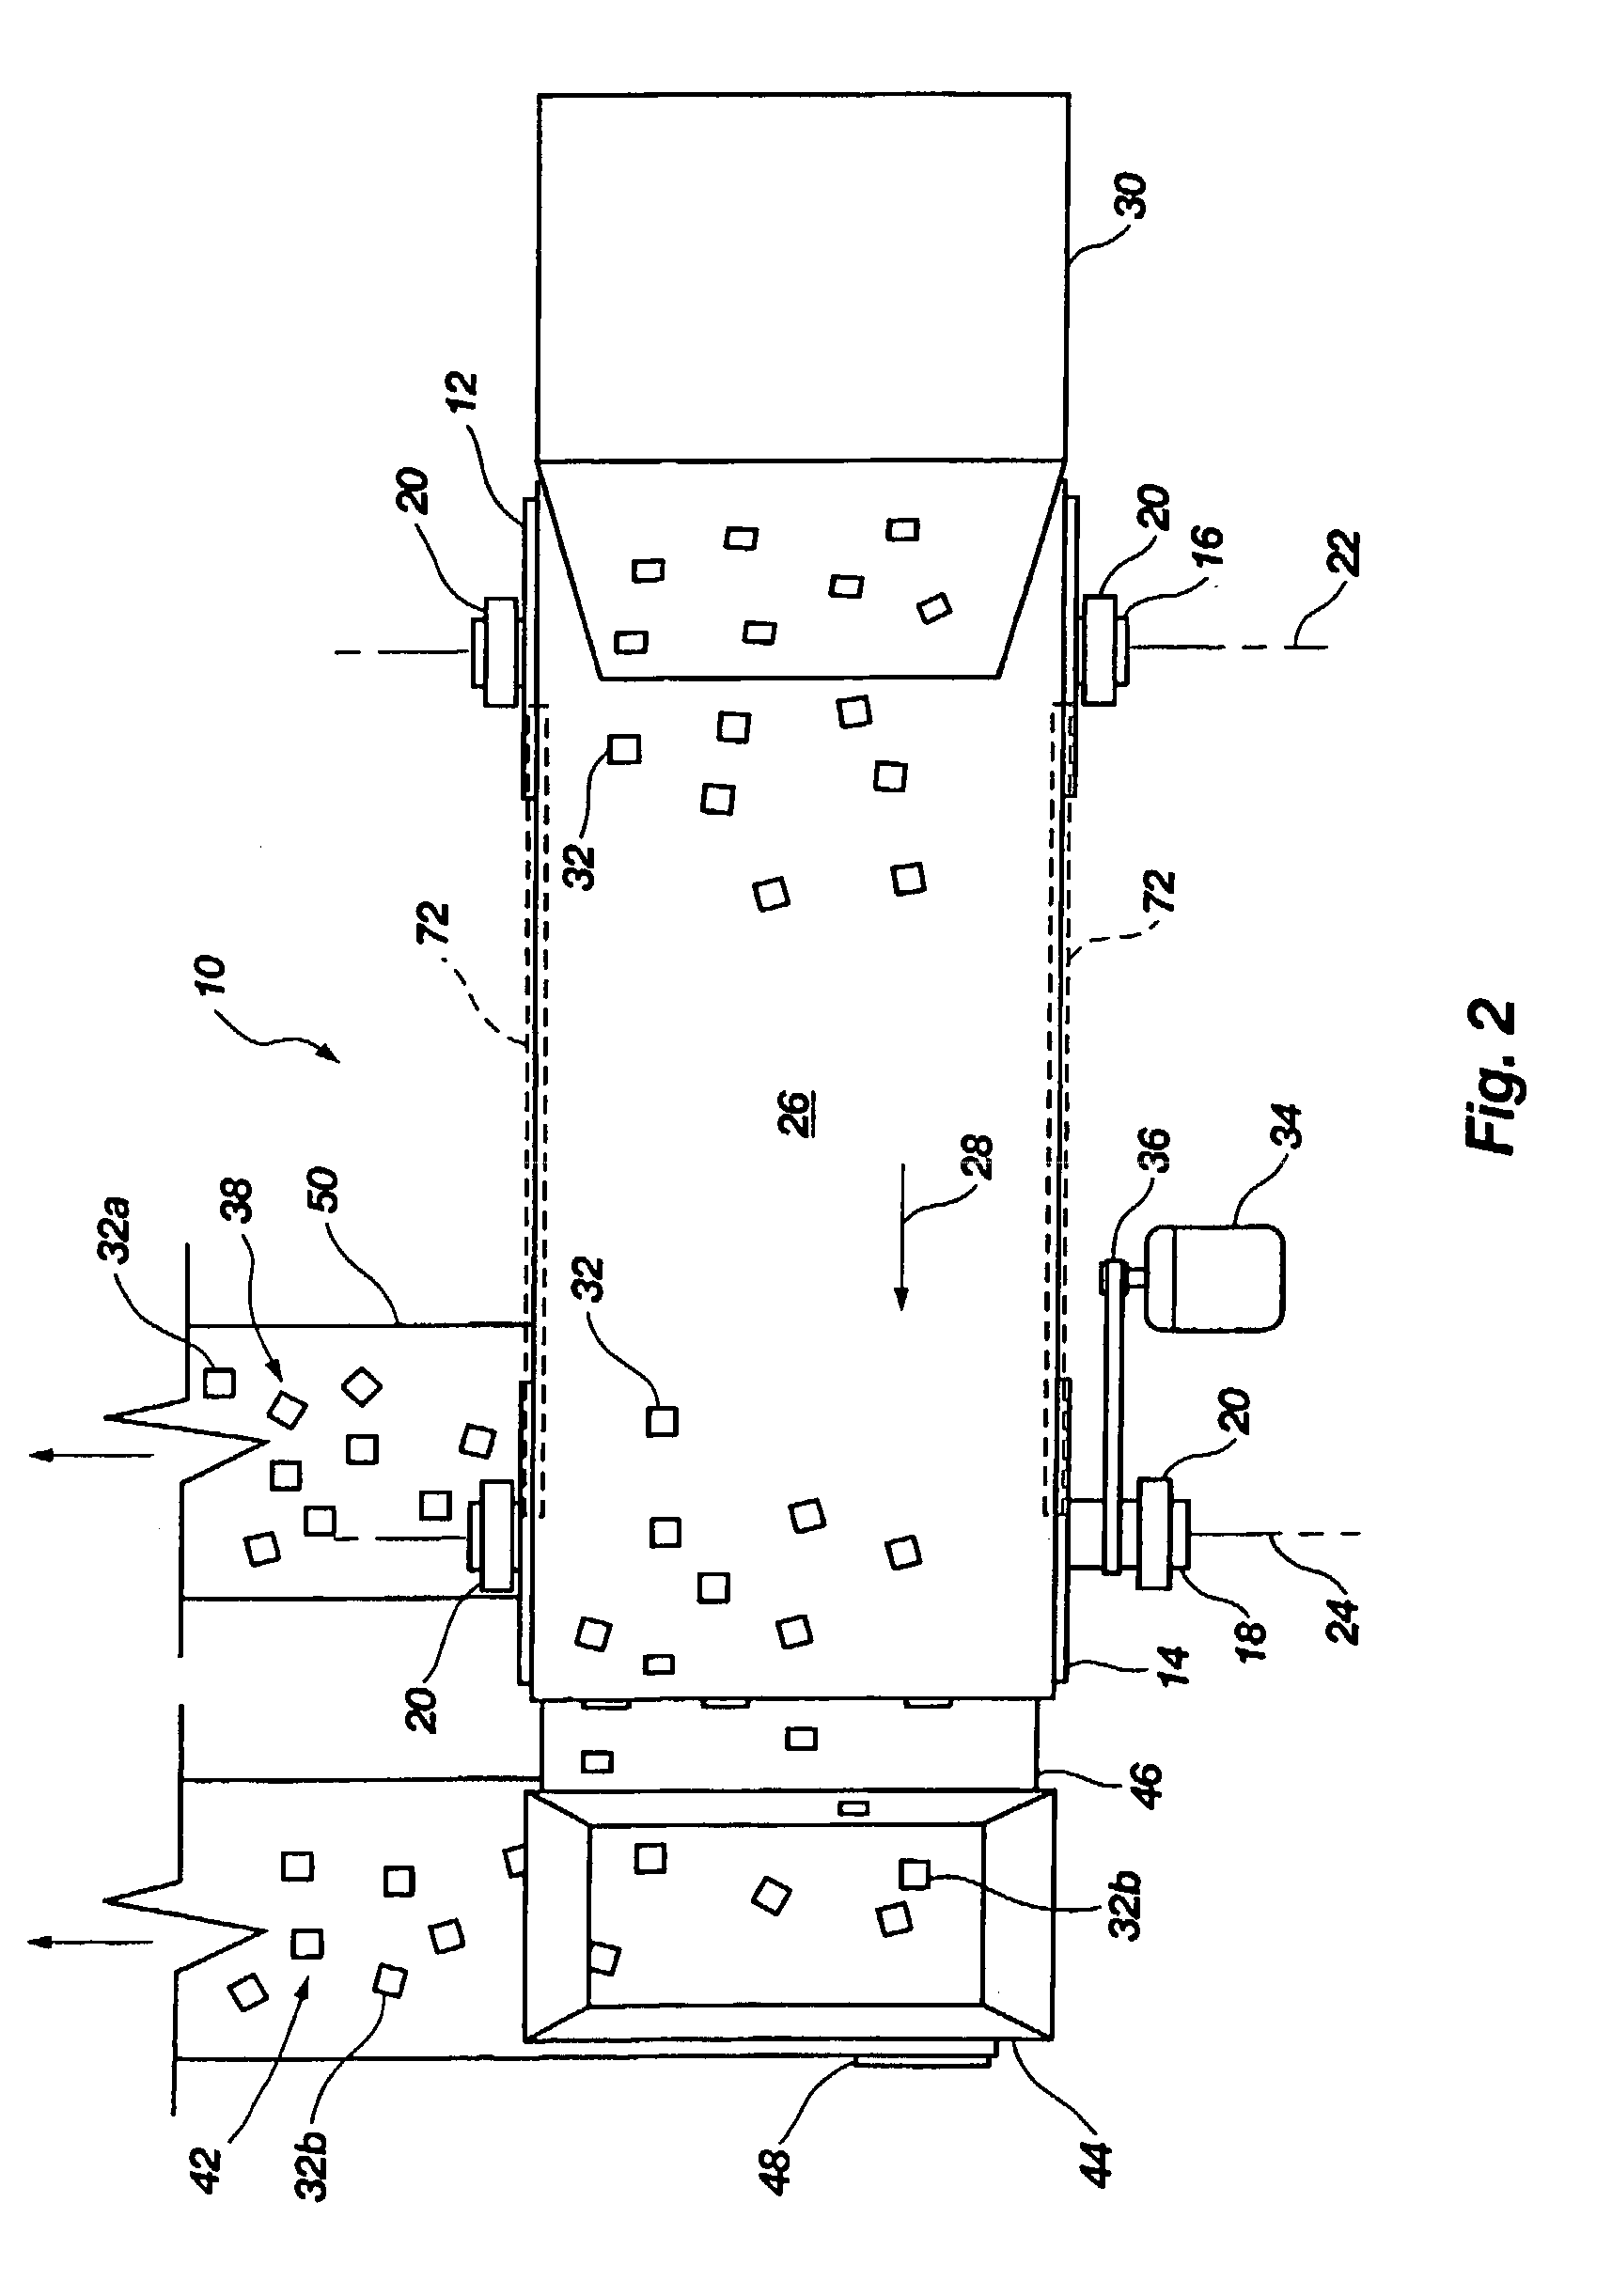 Apparatus for magnetically separating integrated circuit devices